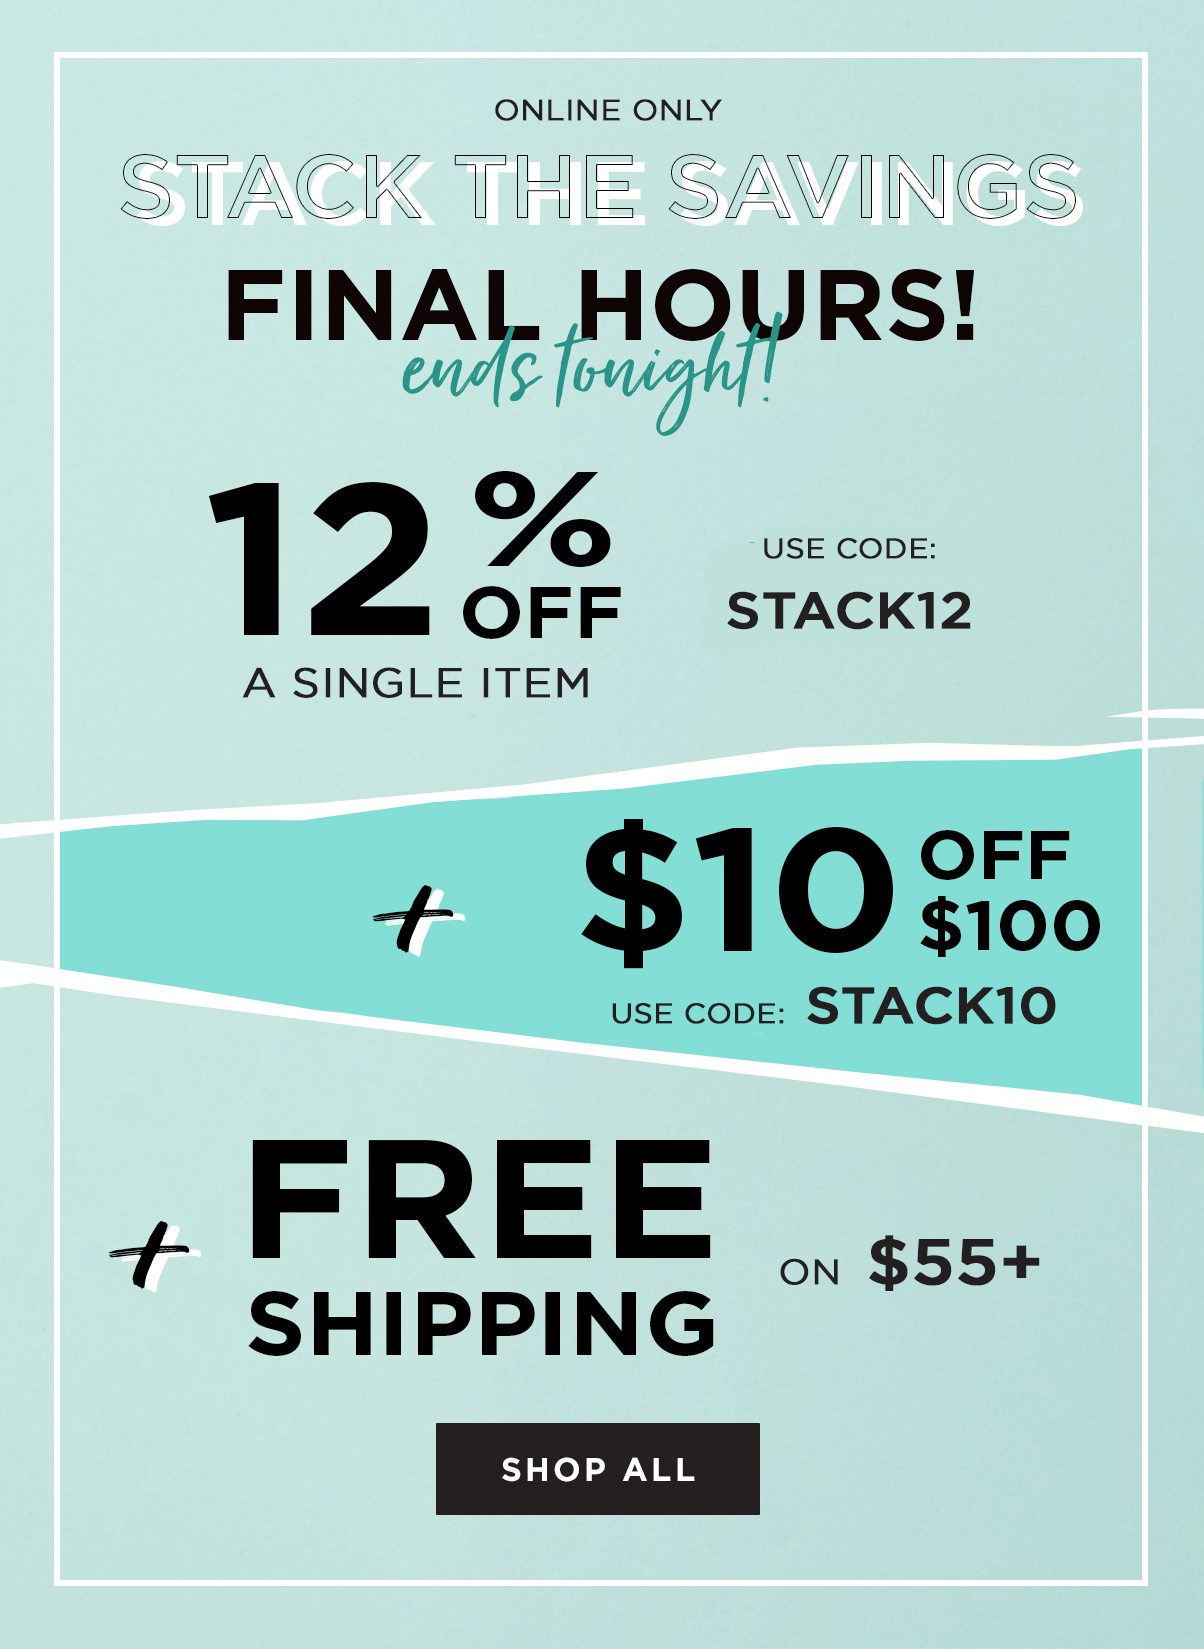 Online Only Stack The Savings Final Hours Ends Tonight! 12% Off A Single Item Use Code: Stack12 + $10 Off $100 Use Code: Stack10 + Free Shipping On $55+ - Shop All!